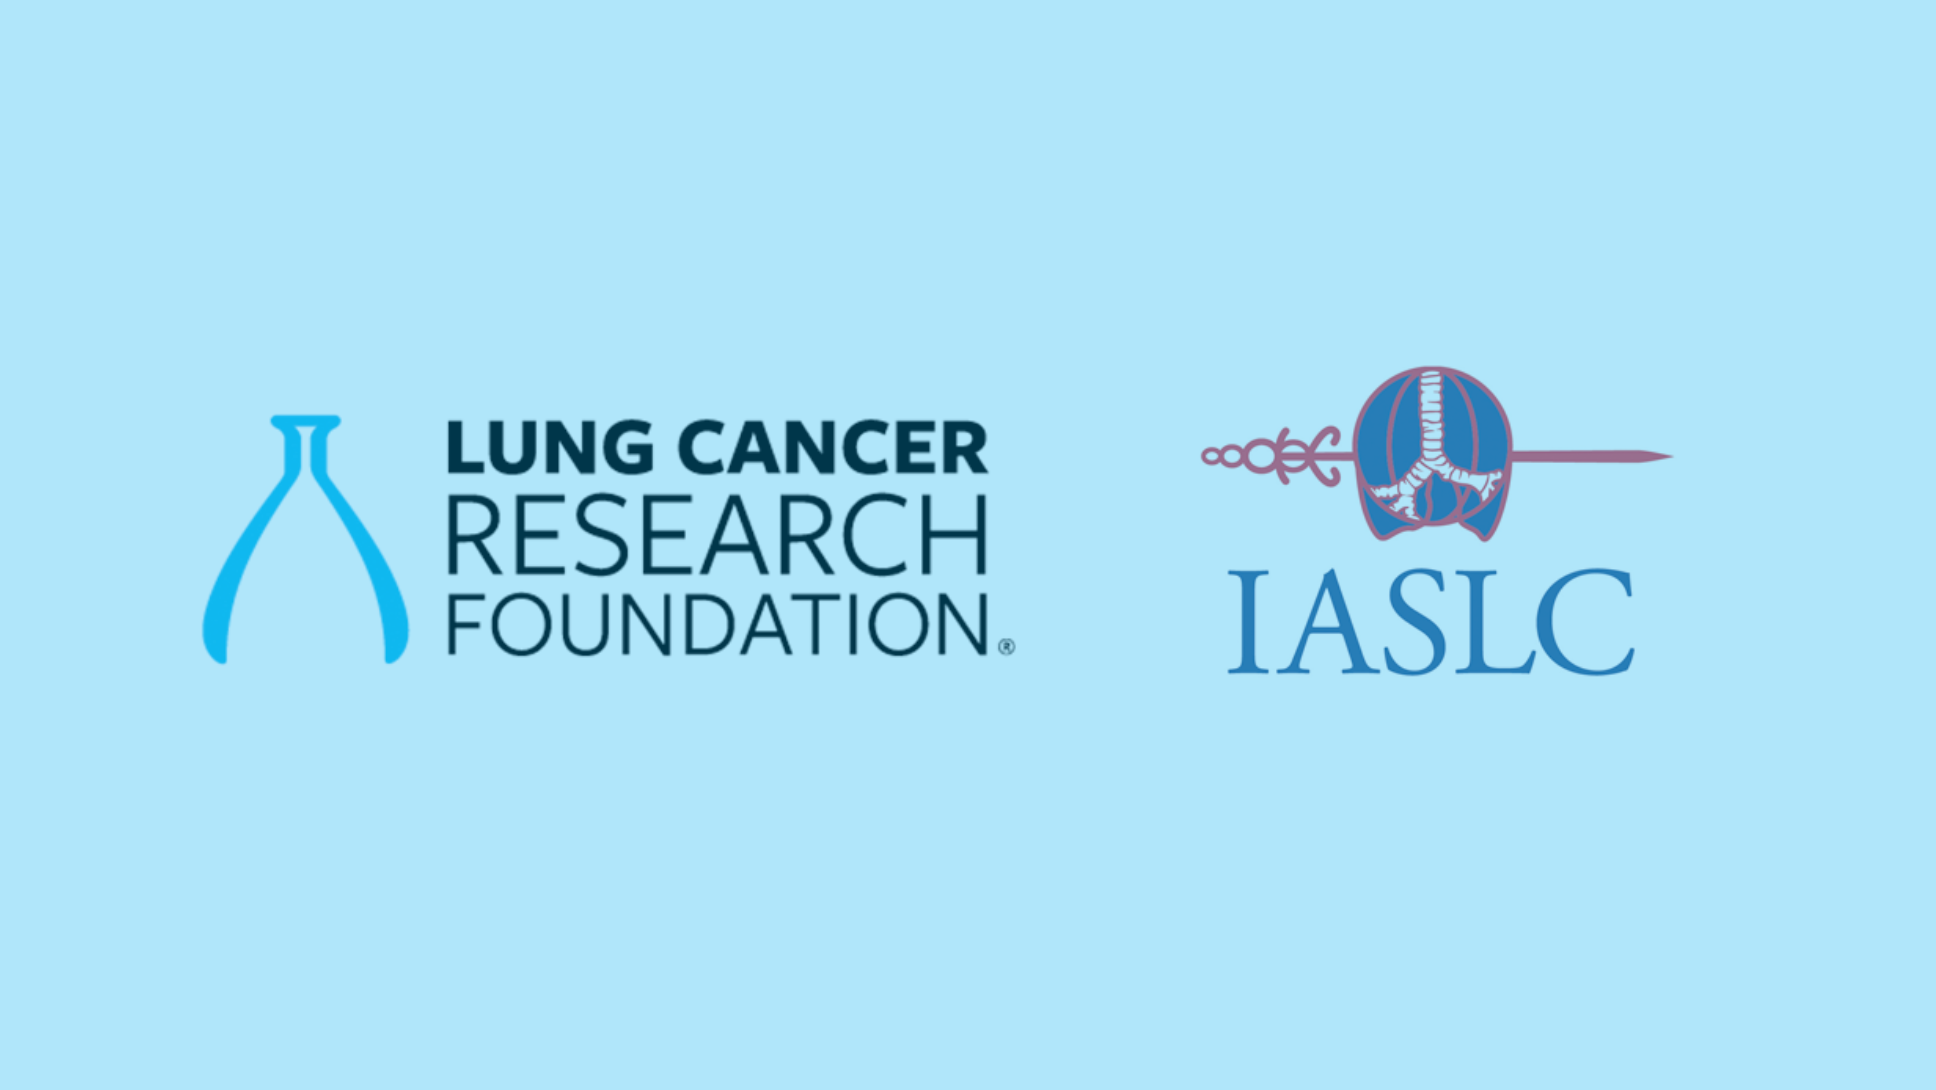 LCRF and IASLC announce new research partnership